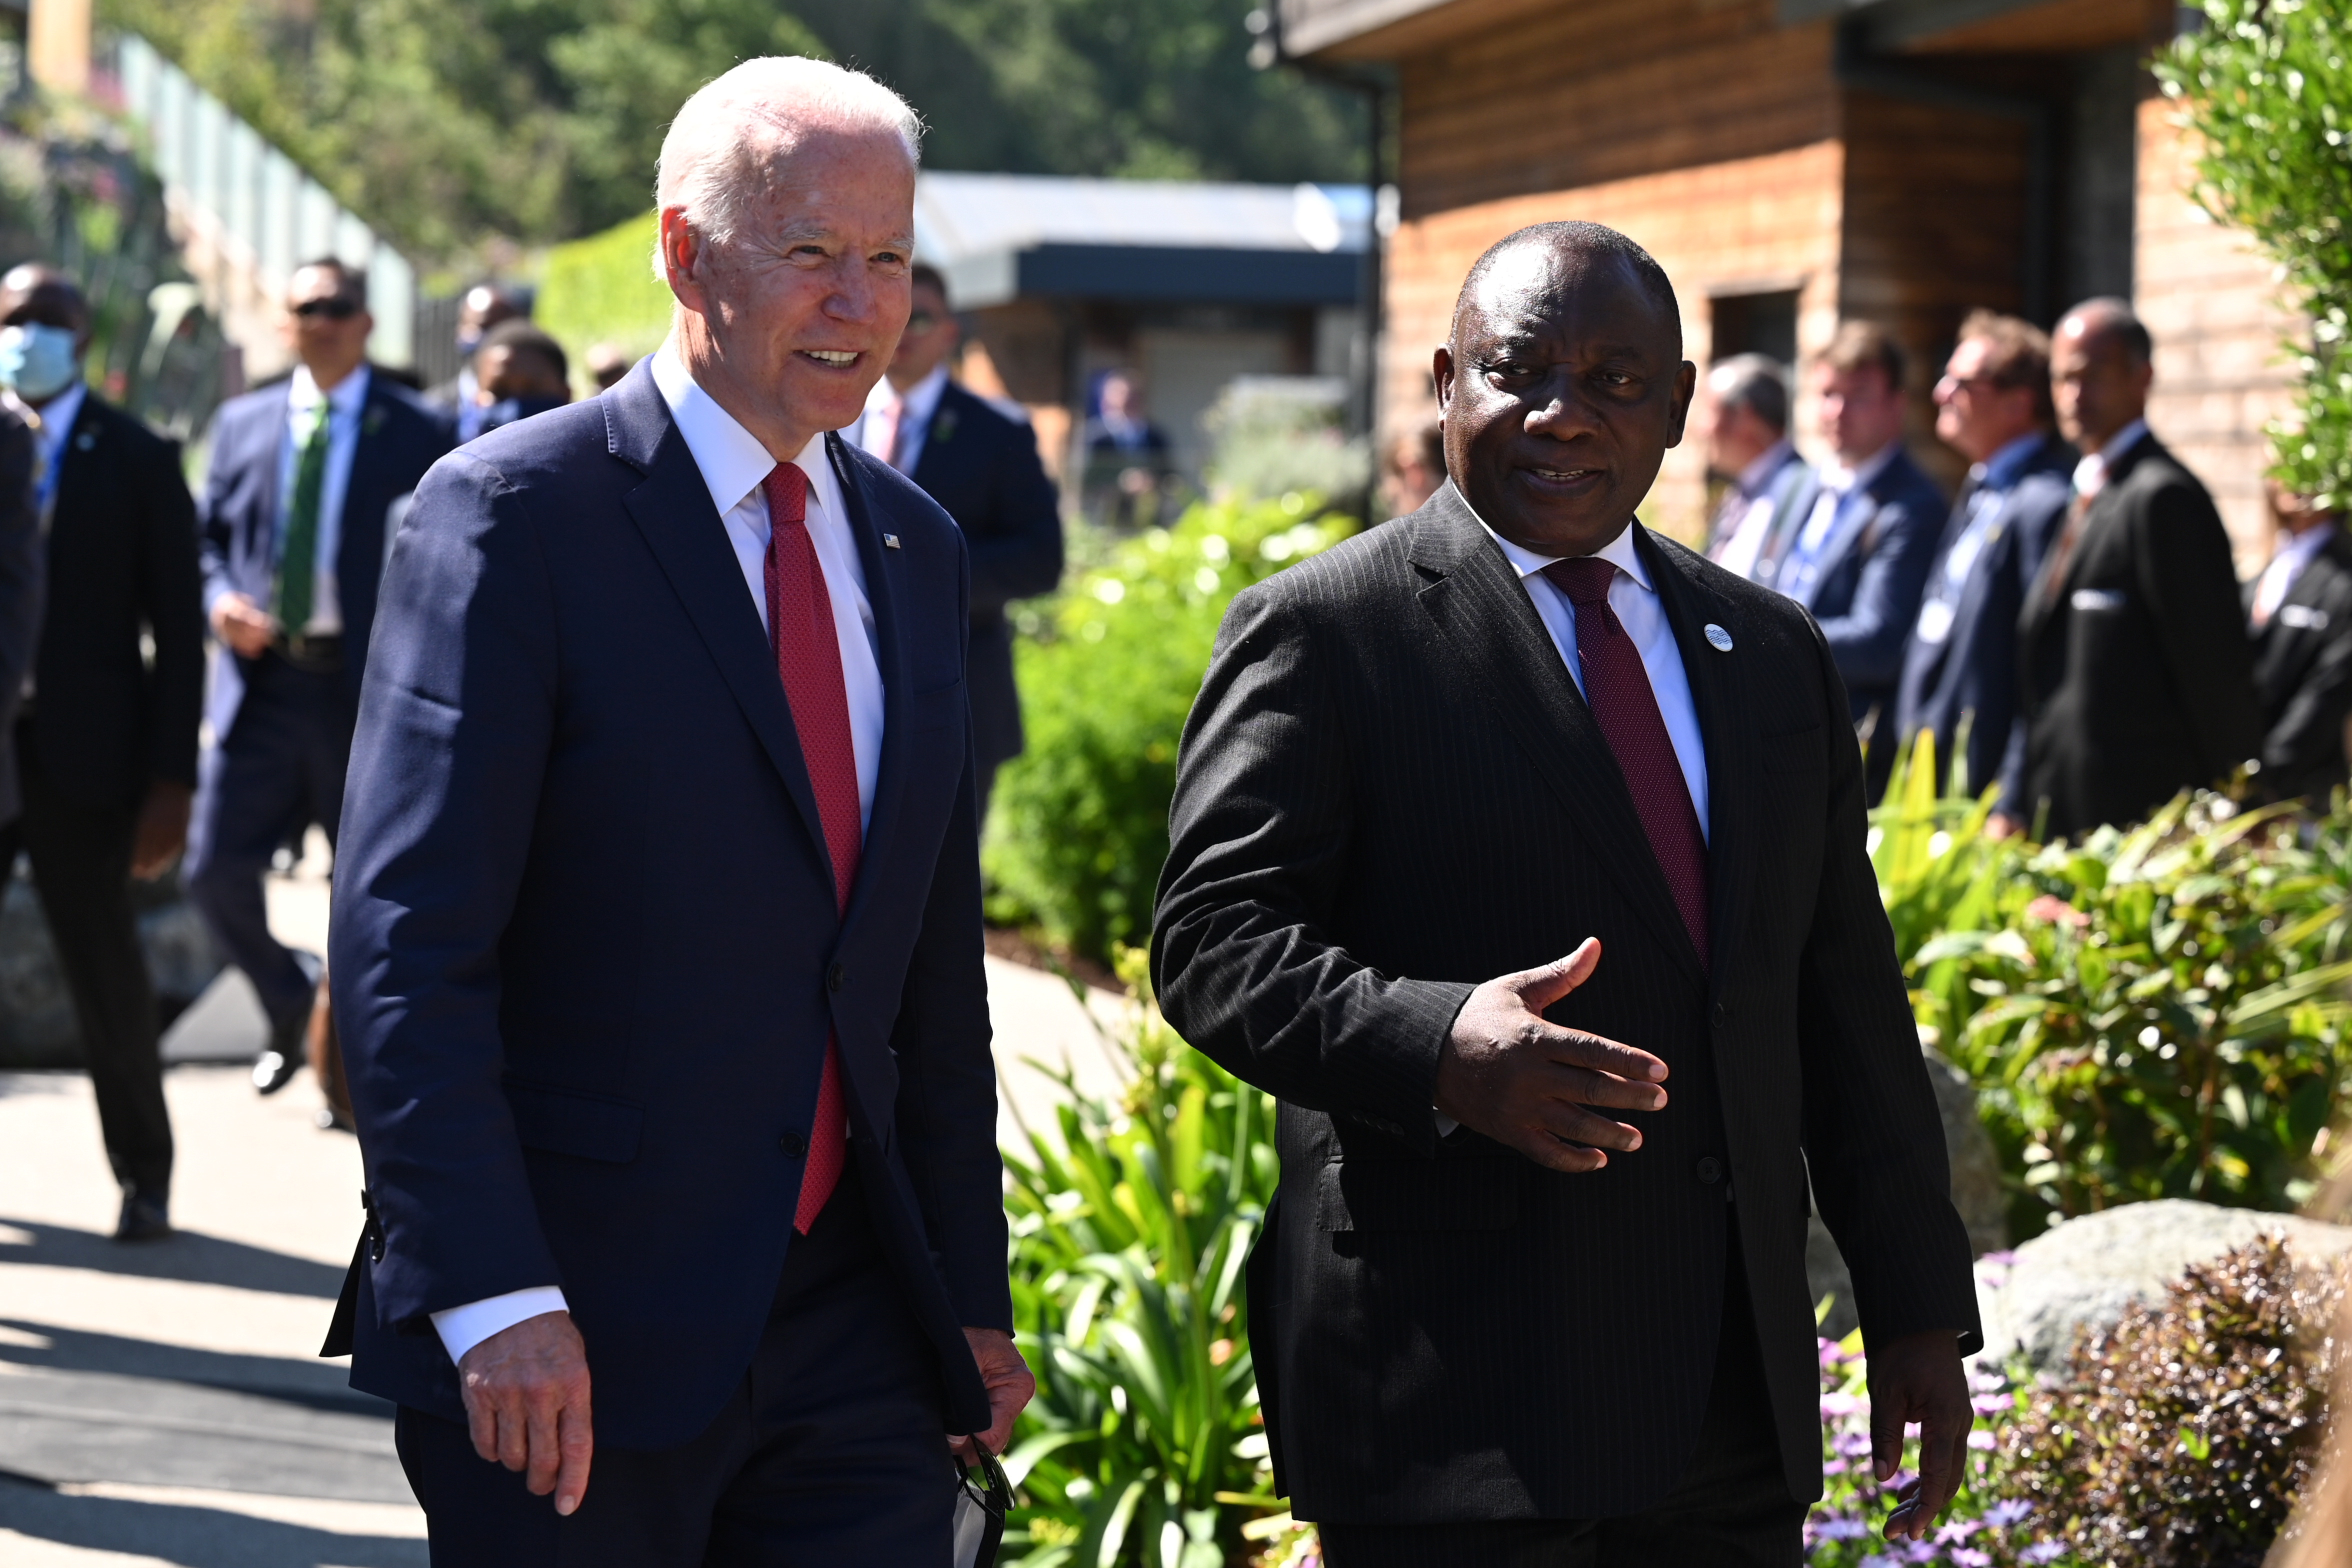 US President Joe Biden (L) will visit South Africa this month to meet with his counterpart Cyril Ramaphosa. It has been suggested that Biden could use the trip to iron out differences over the Russia-Ukraine war.